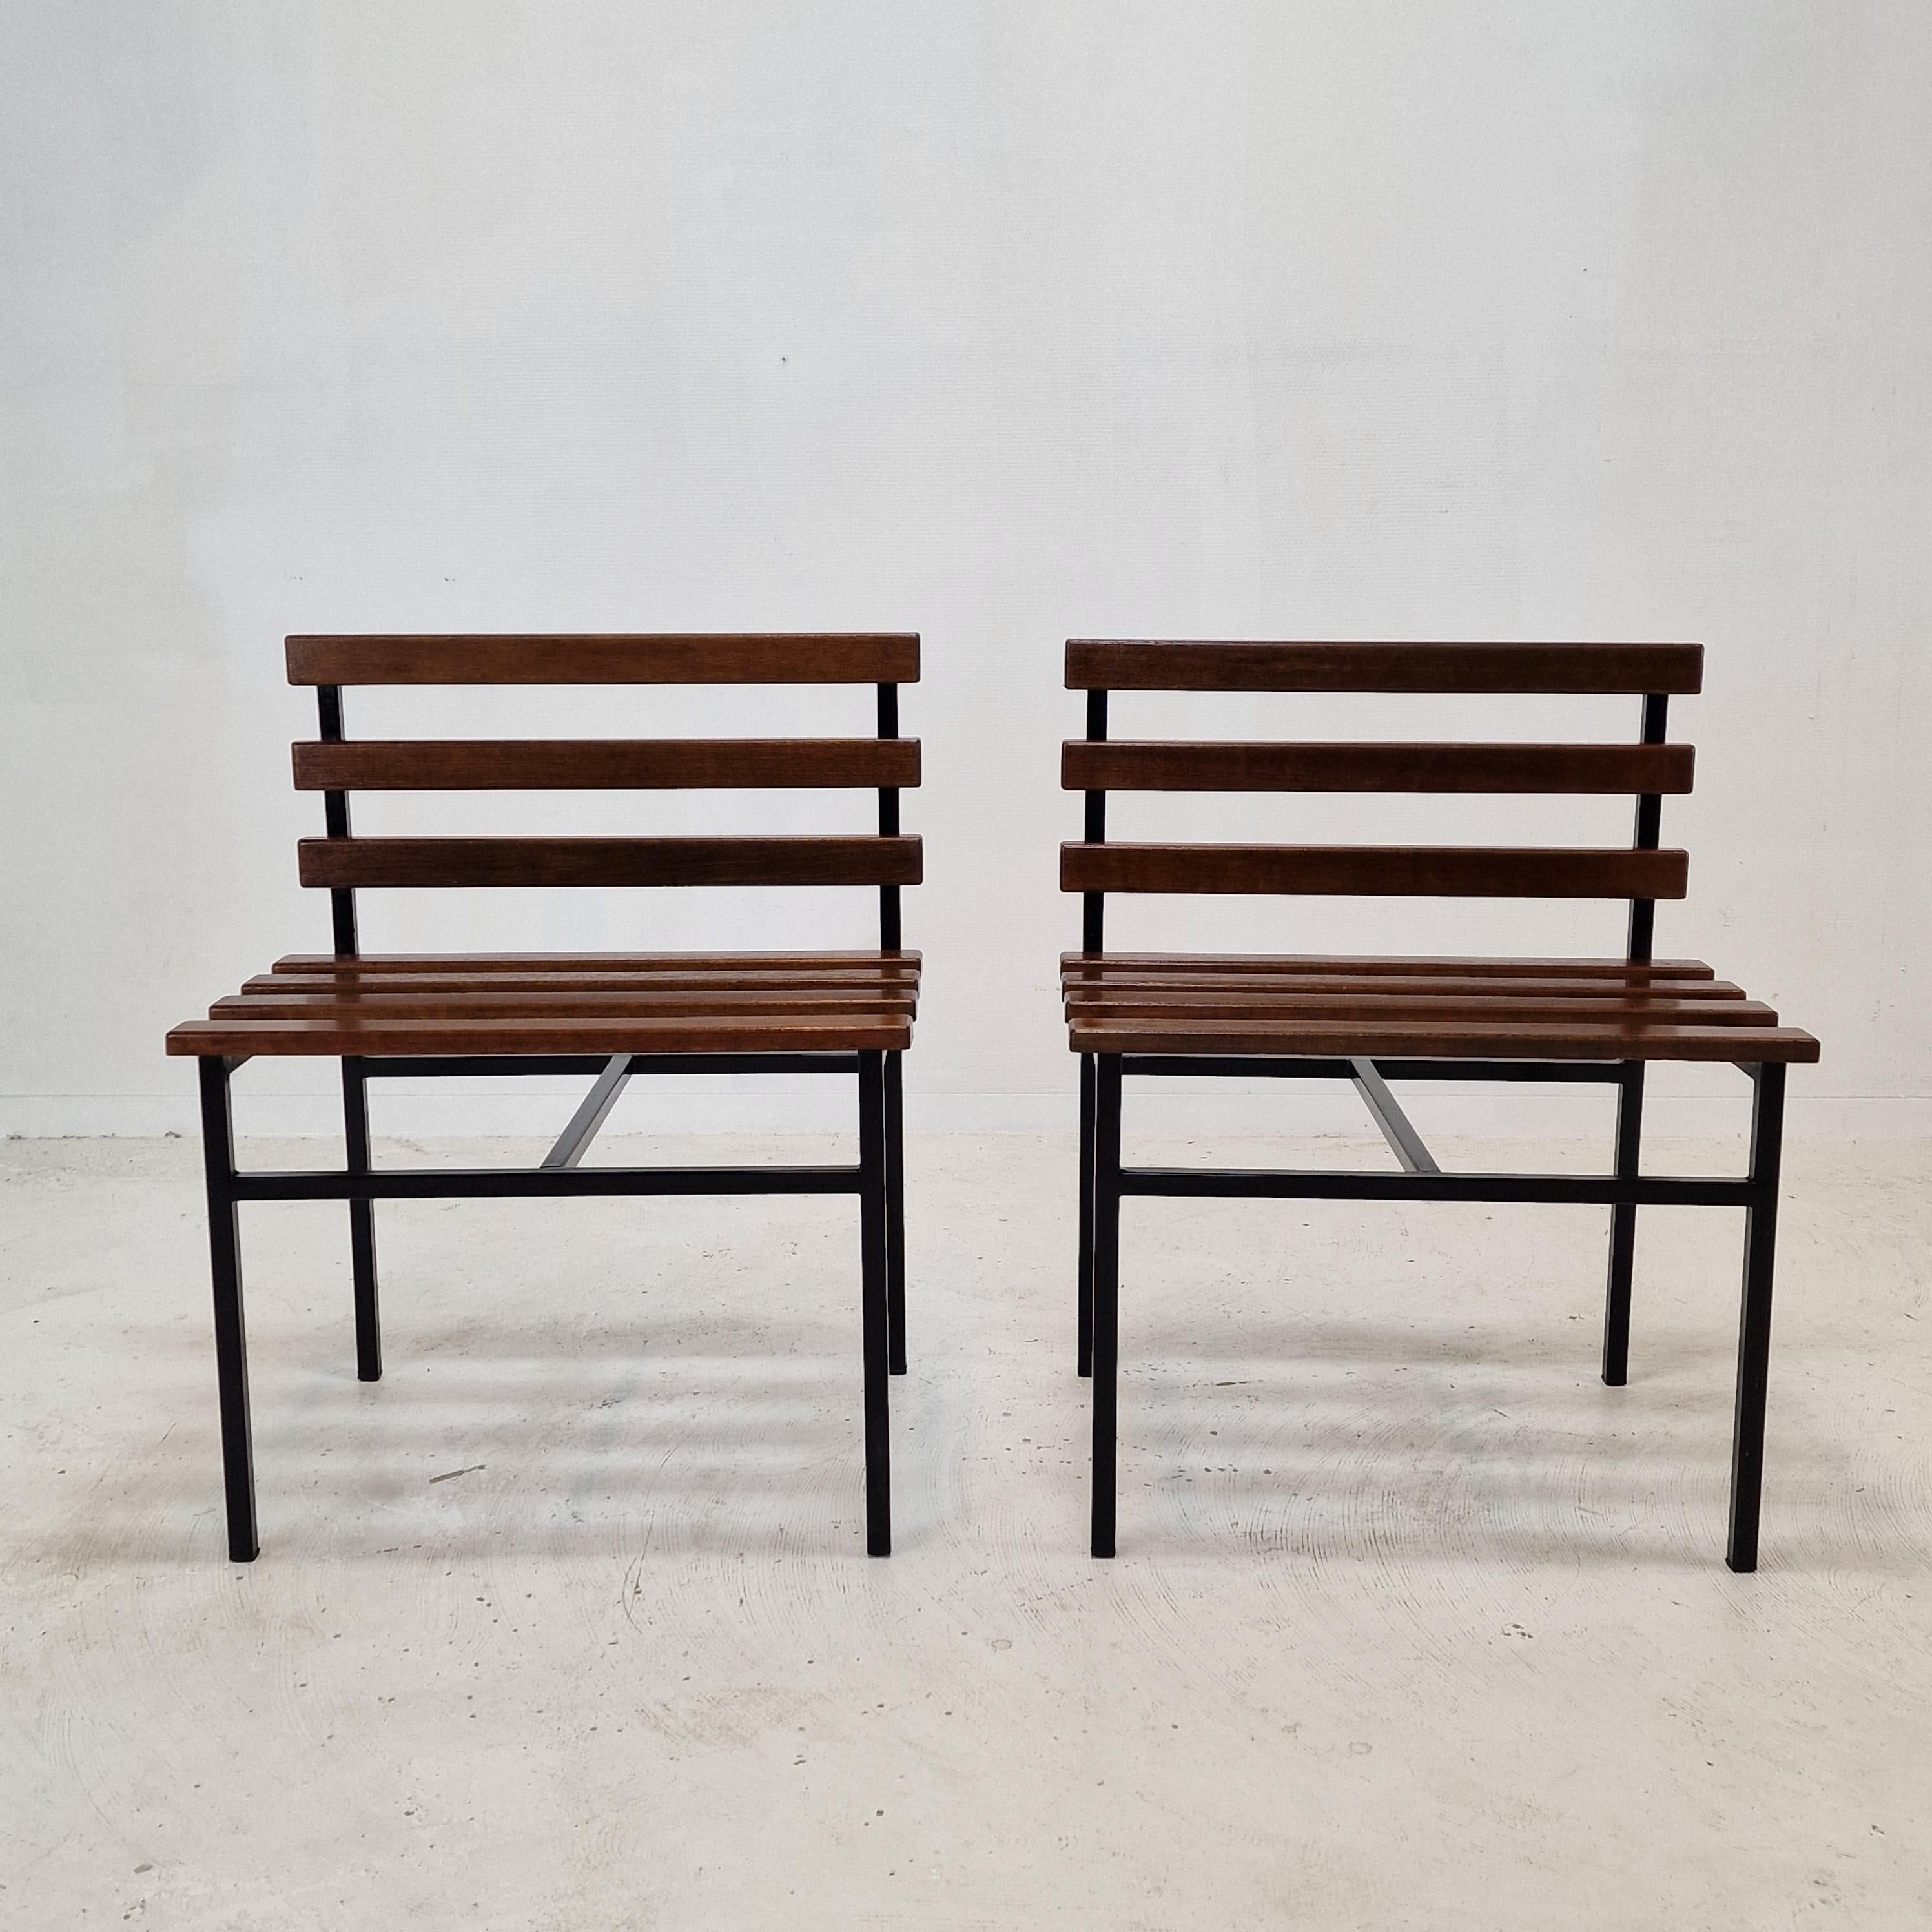 Very nice set of 2 Italian benches or chairs.
They are made in the 1960s. 

Teak wooden seating with a black metal structure.

We work with professional packers and shippers, we can deliver in 5 to 10 days.